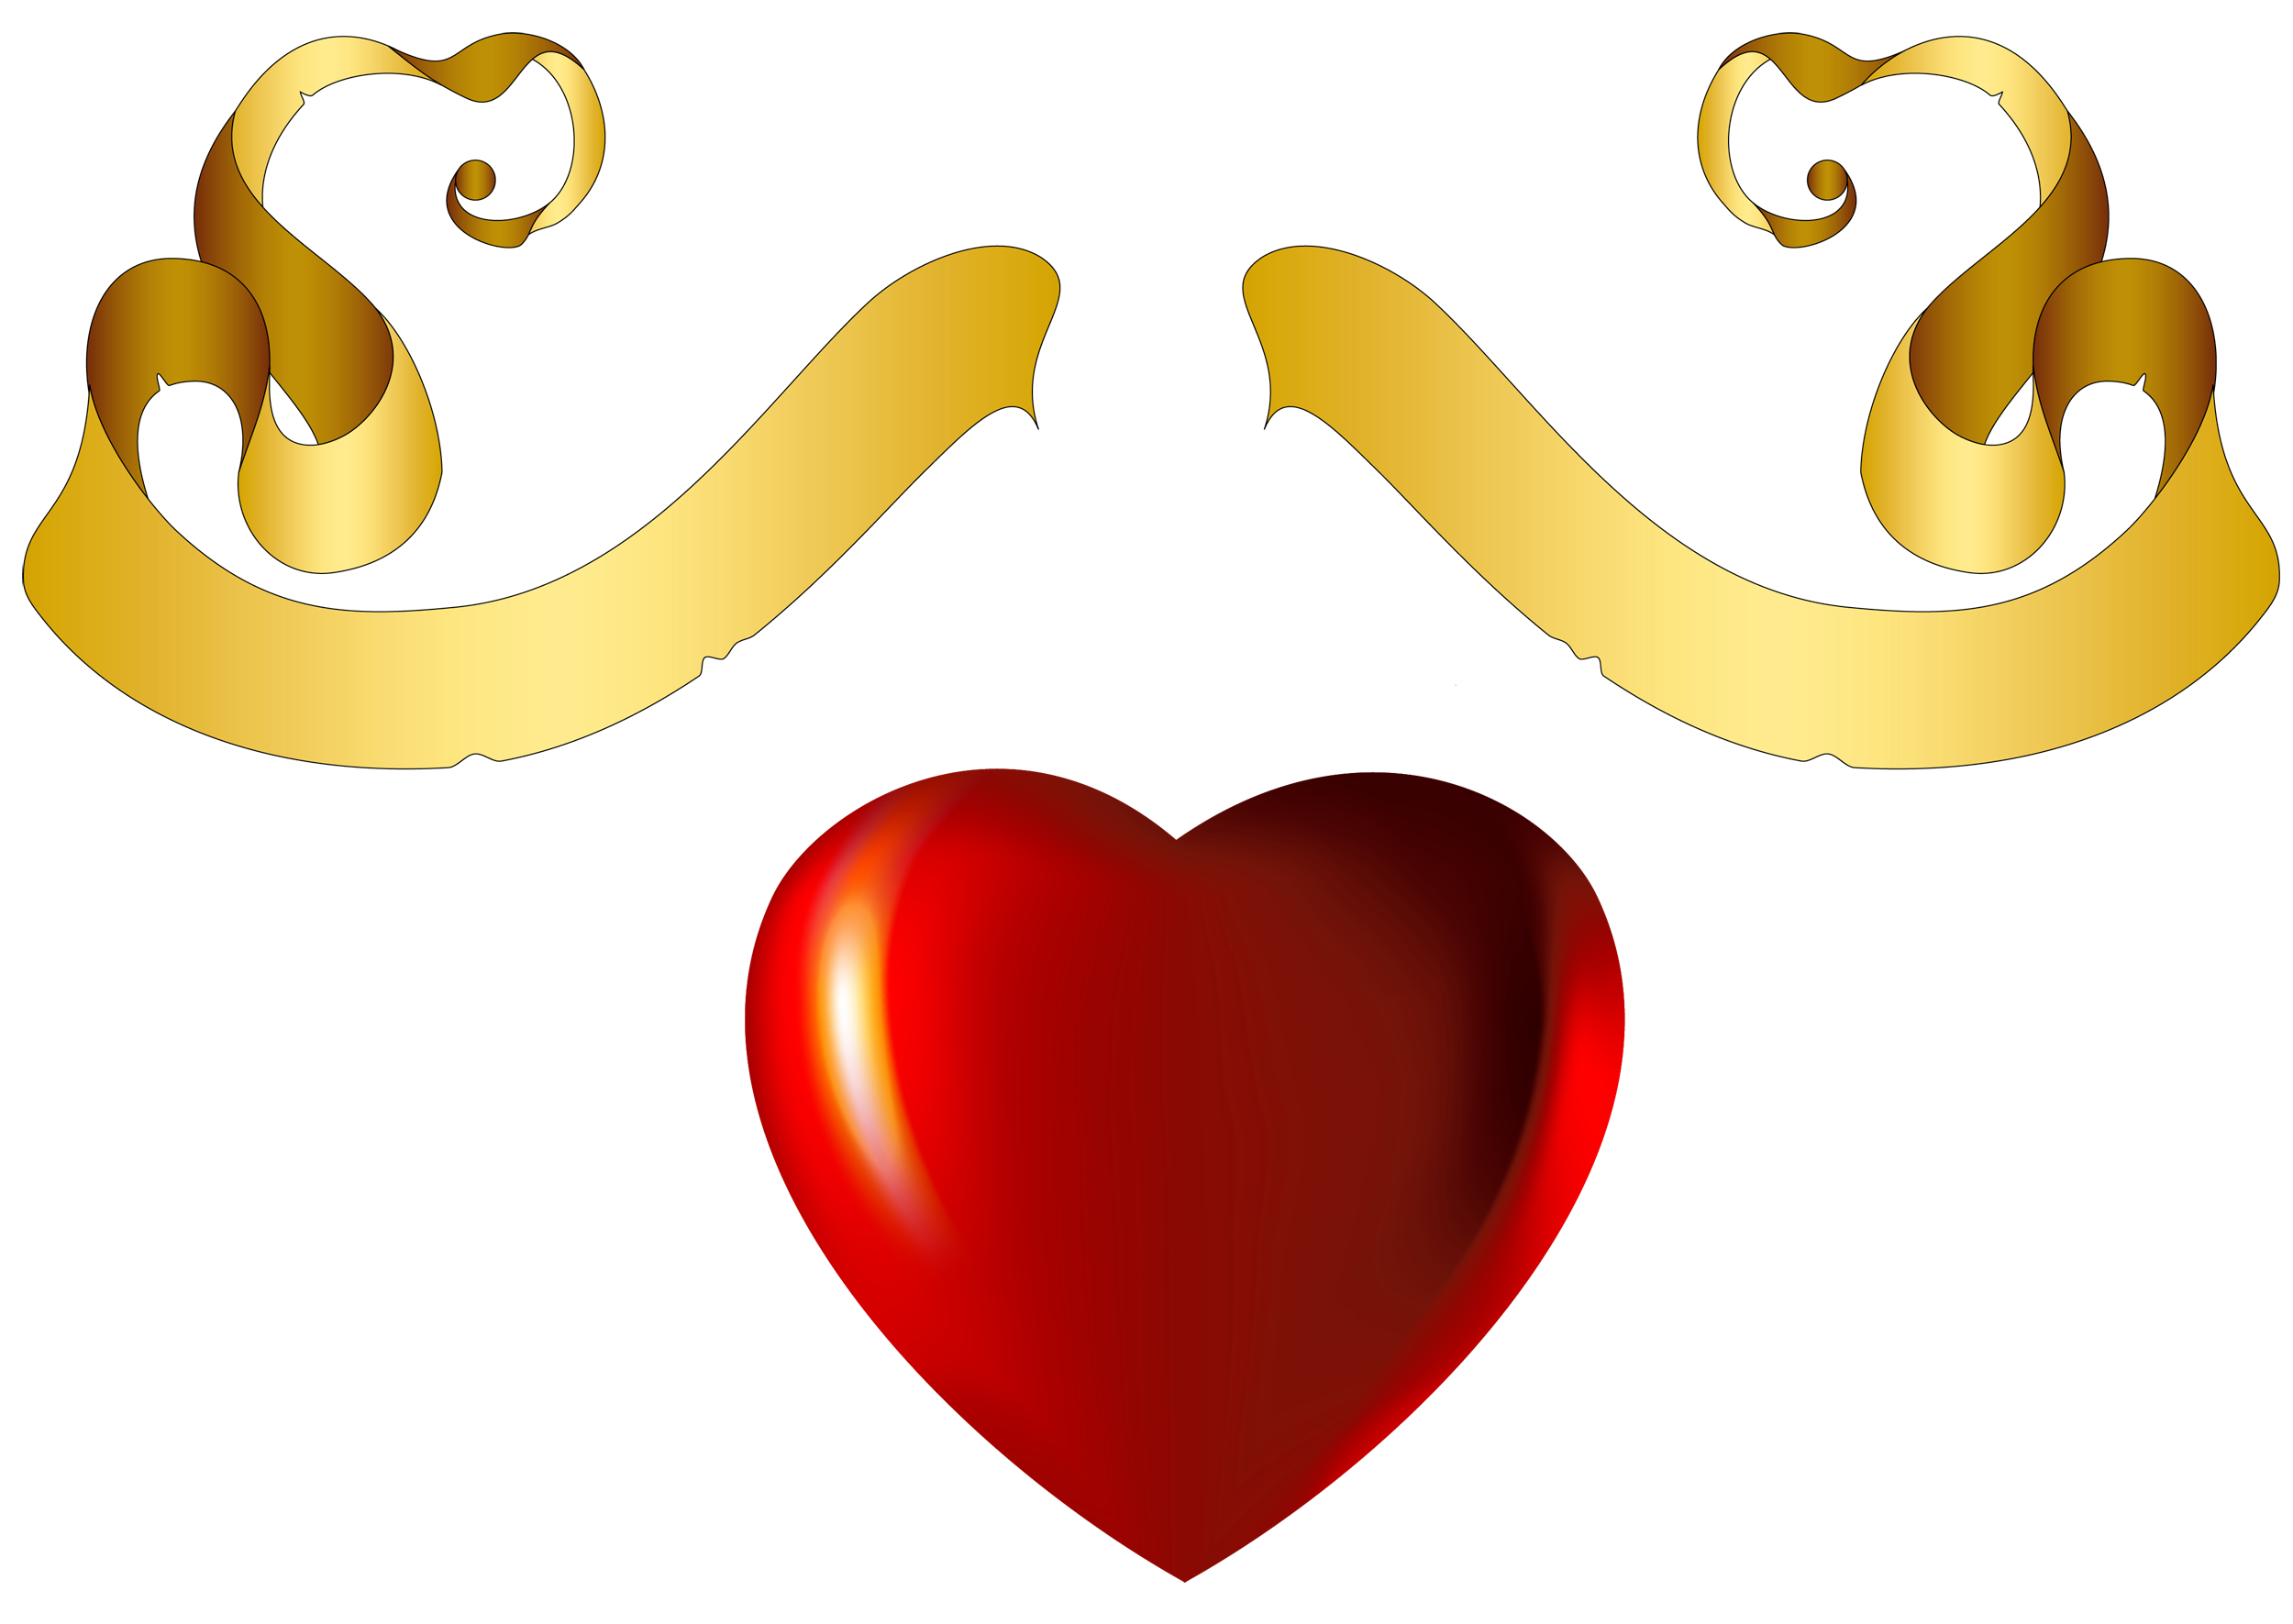 Heart_with_Gold_Banner_Element_Clipart.png?m=1375740000 